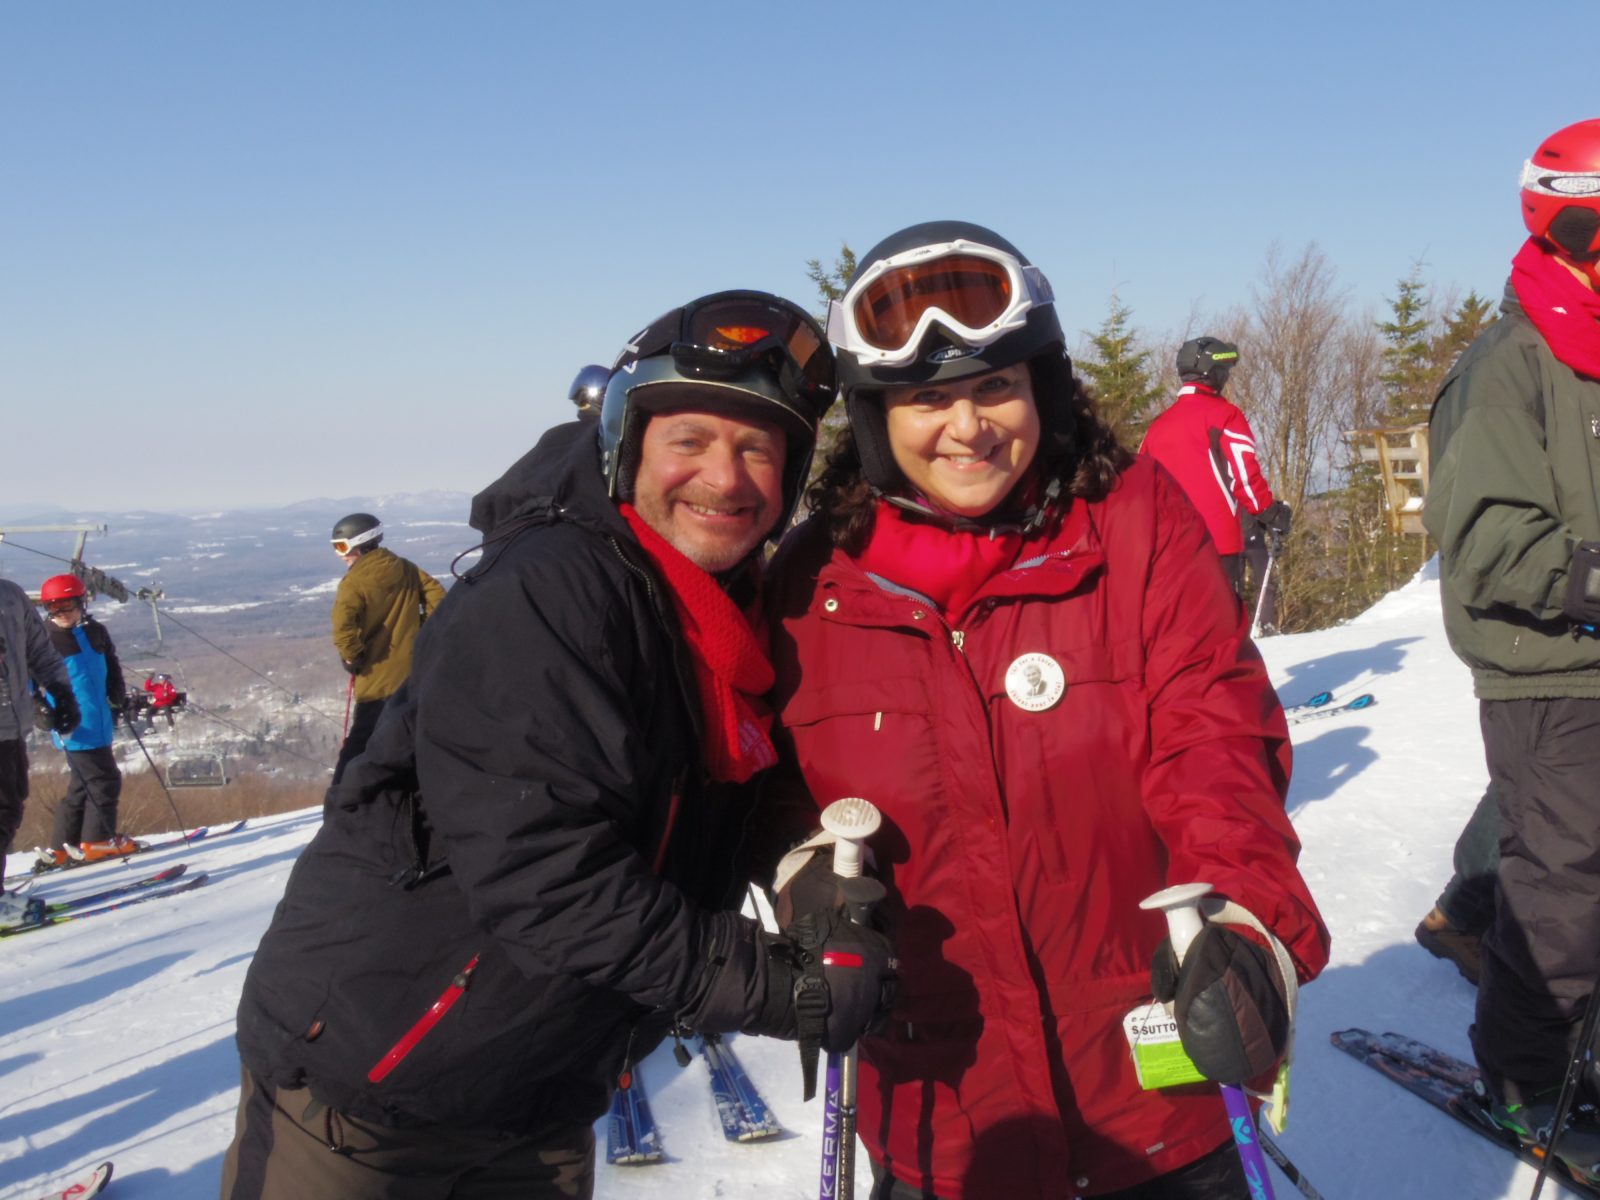 Ski for a cure snags $50,000